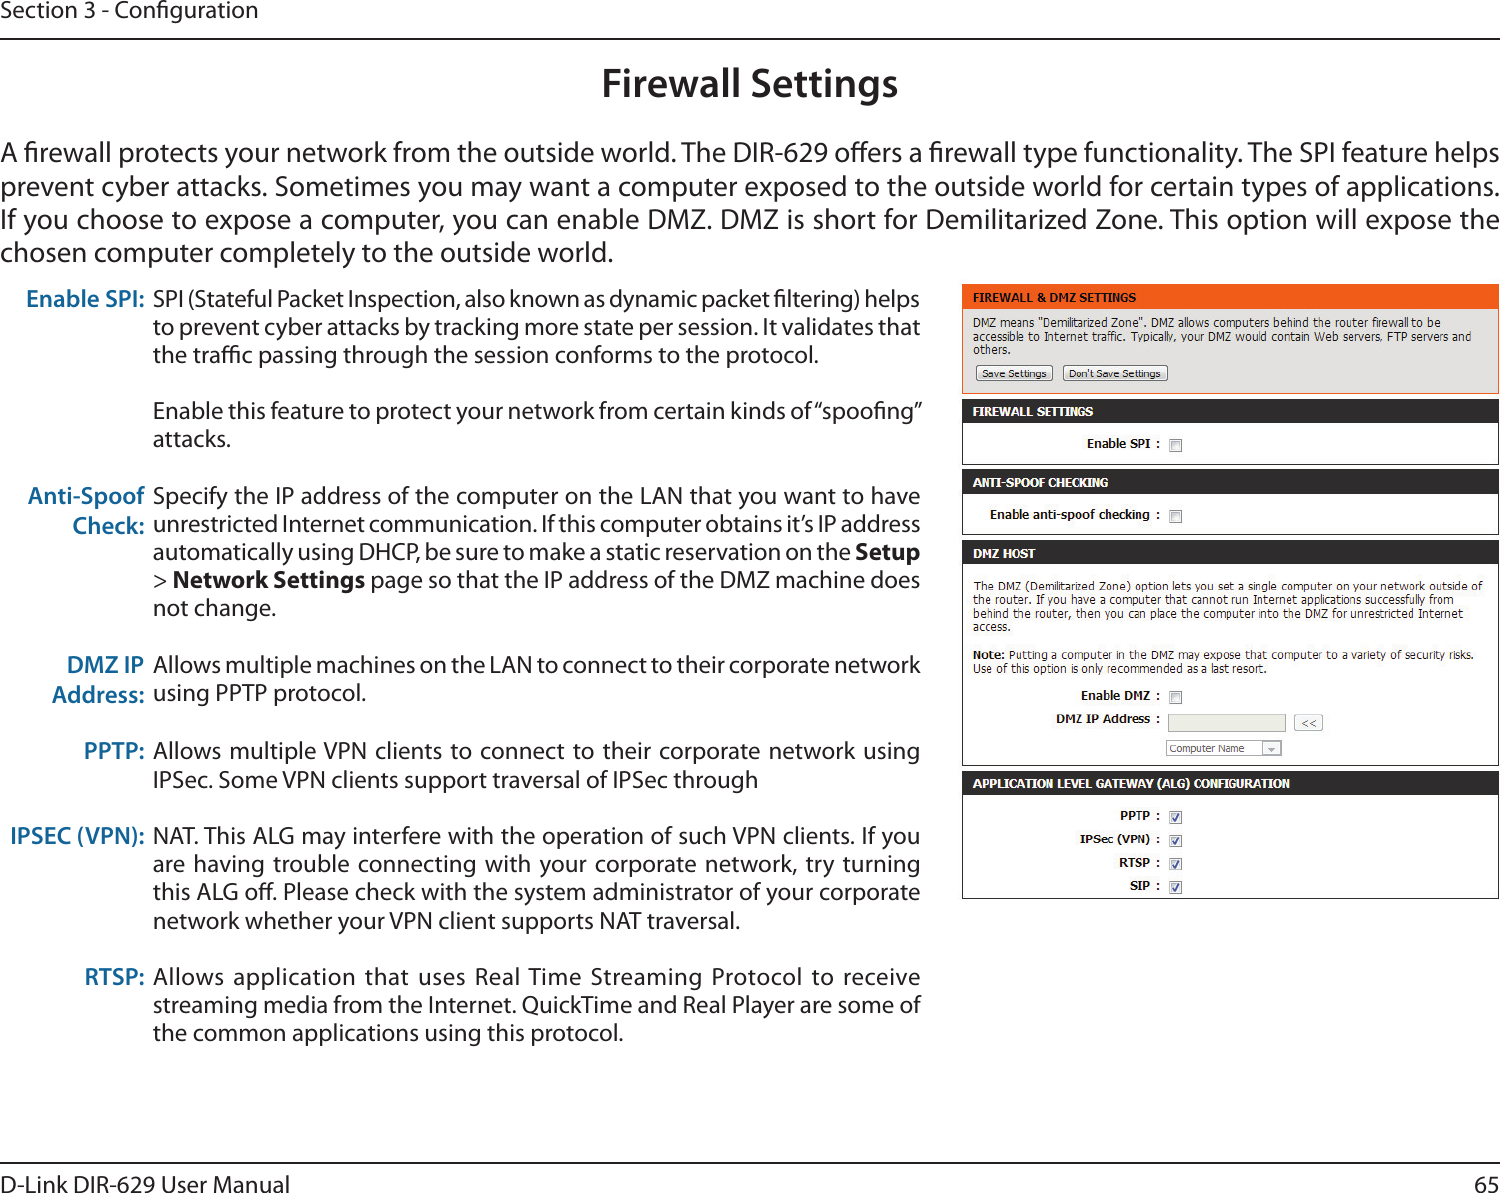 65D-Link DIR-629 User ManualSection 3 - CongurationFirewall Settingsprevent cyber attacks. Sometimes you may want a computer exposed to the outside world for certain types of applications. If you choose to expose a computer, you can enable DMZ. DMZ is short for Demilitarized Zone. This option will expose the chosen computer completely to the outside world.Enable SPI: SPI (Stateful Packet Inspection, also known as dynamic packet ltering) helps to prevent cyber attacks by tracking more state per session. It validates that the trac passing through the session conforms to the protocol.Enable this feature to protect your network from certain kinds of “spoong” attacks. Anti-Spoof Check:Specify the IP address of the computer on the LAN that you want to have unrestricted Internet communication. If this computer obtains it’s IP address automatically using DHCP, be sure to make a static reservation on the Setup &gt; Network Settings page so that the IP address of the DMZ machine does not change.DMZ IP Address:Allows multiple machines on the LAN to connect to their corporate network using PPTP protocol.PPTP: Allows multiple VPN clients to connect to their corporate network using IPSec. Some VPN clients support traversal of IPSec throughIPSEC (VPN): NAT. This ALG may interfere with the operation of such VPN clients. If you are having trouble connecting with your corporate network, try turning this ALG o. Please check with the system administrator of your corporate network whether your VPN client supports NAT traversal.RTSP: the common applications using this protocol.